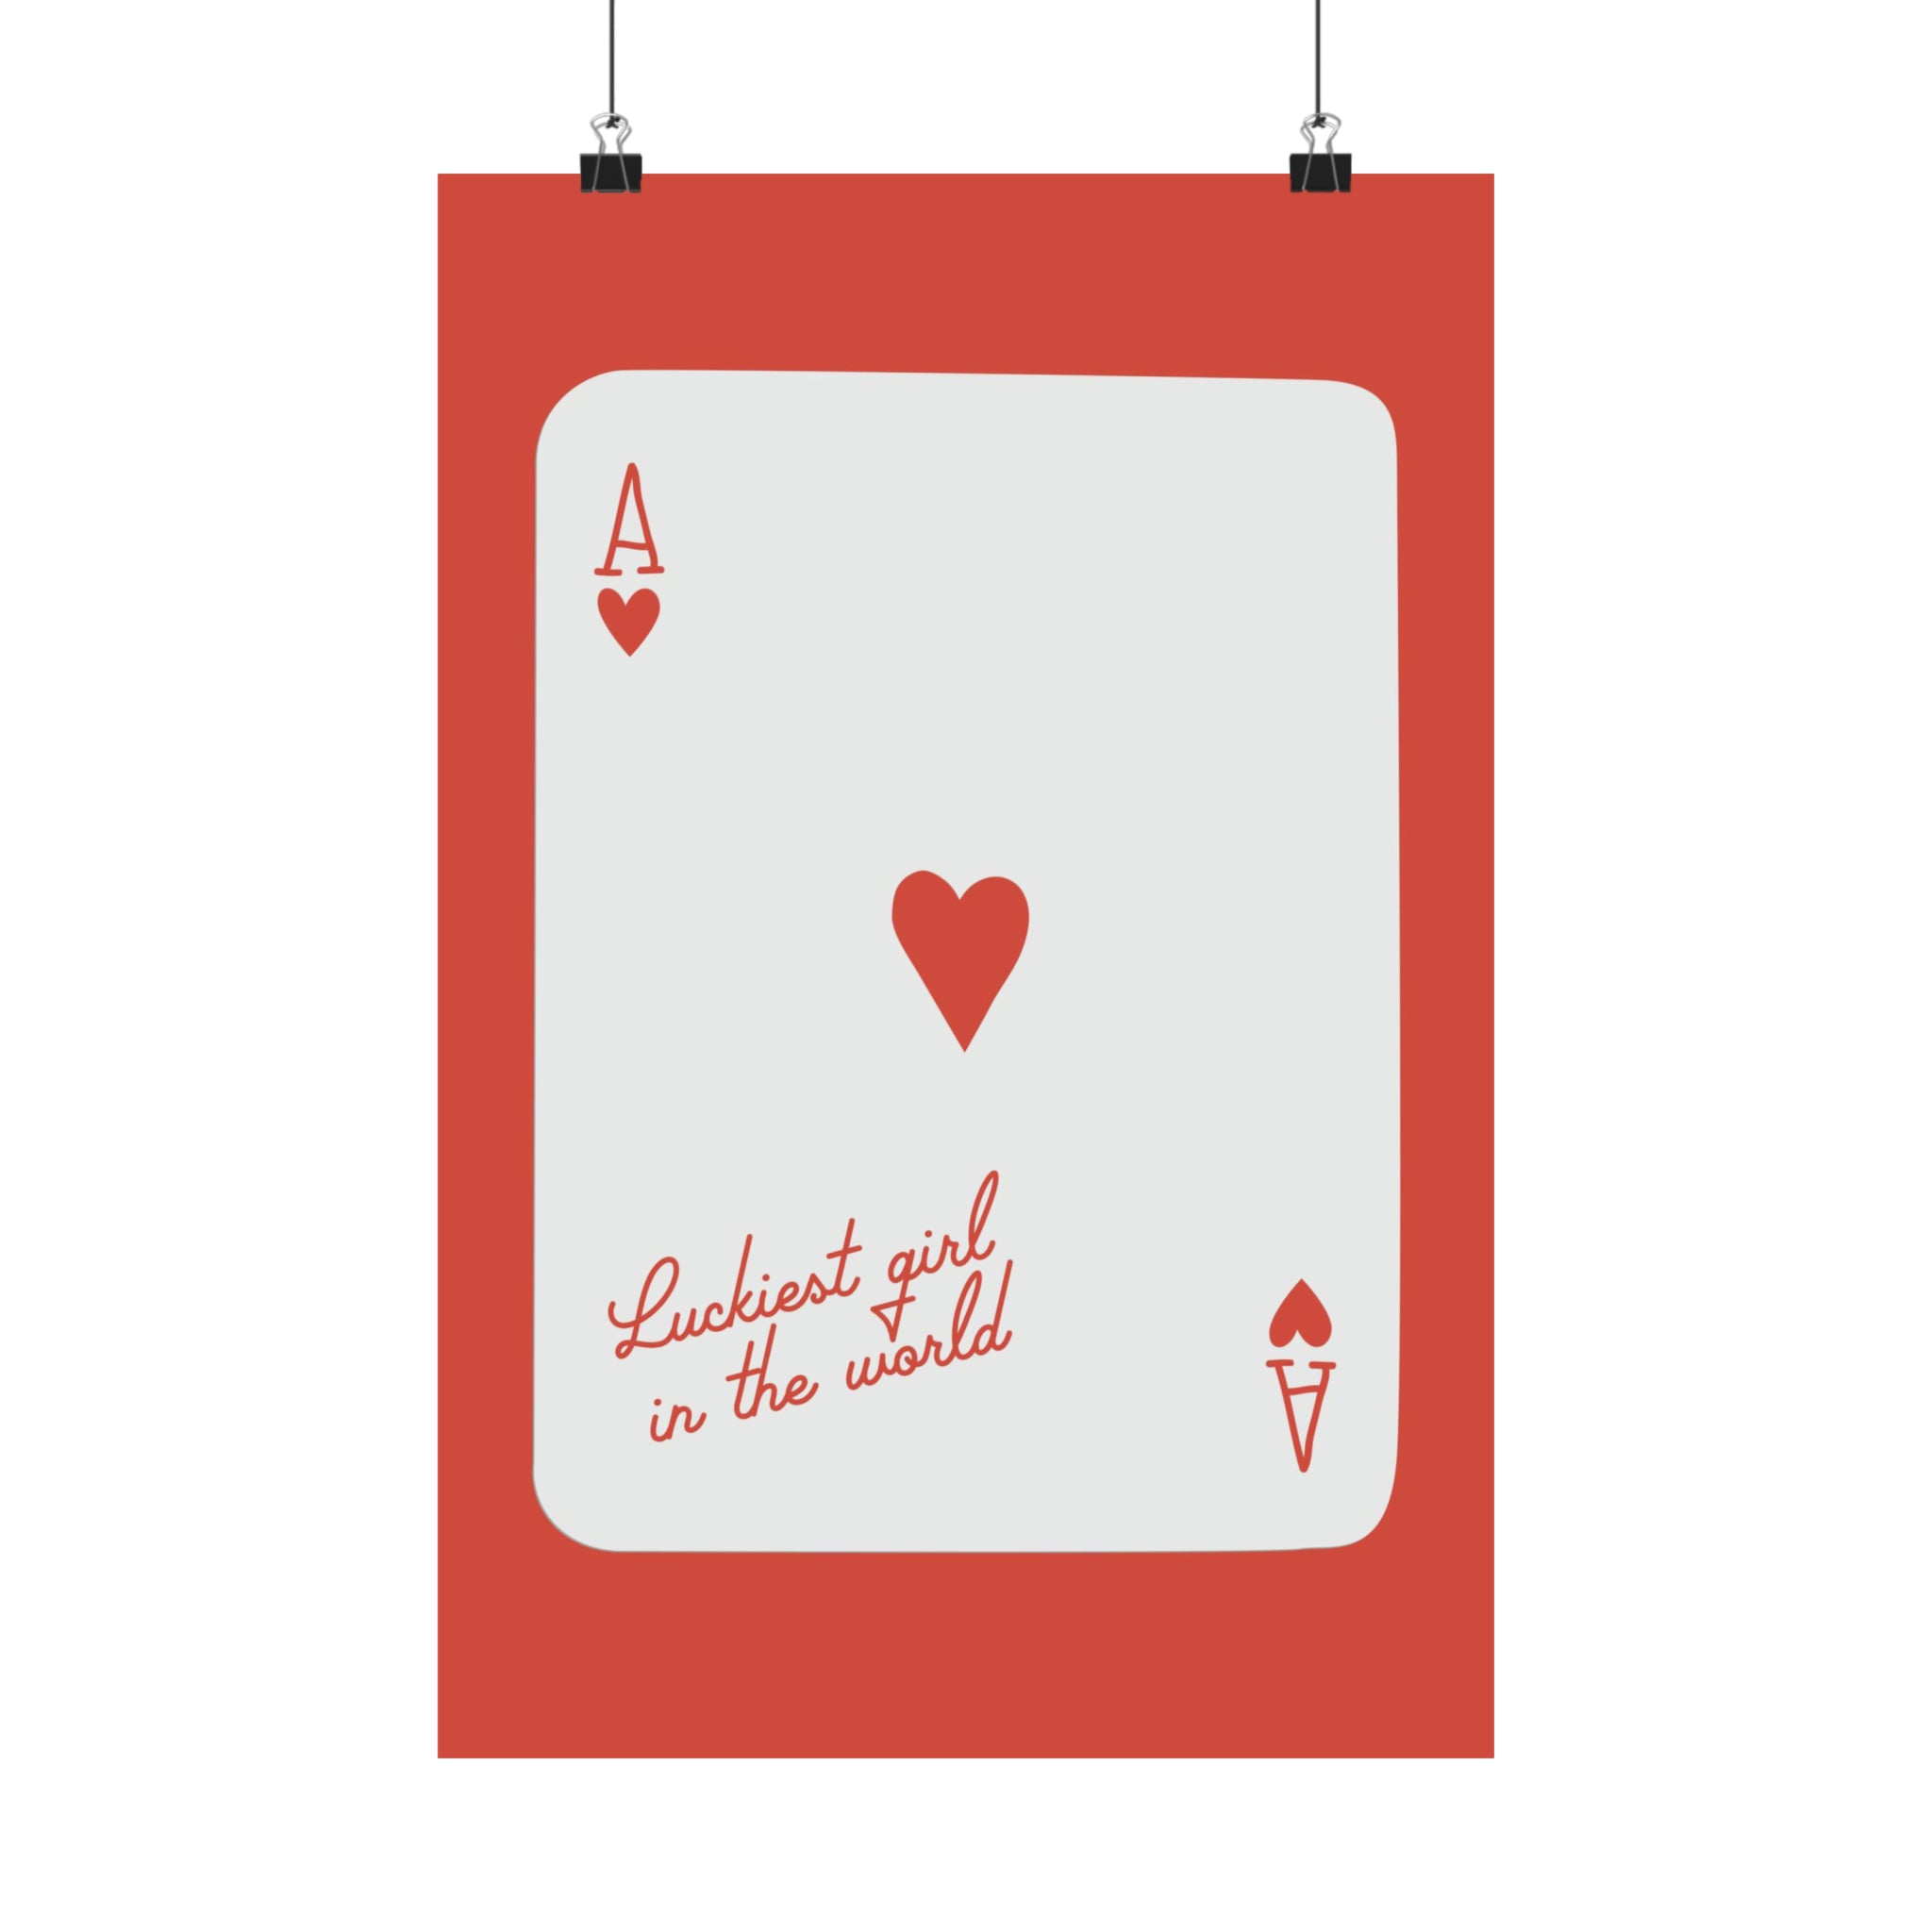 Luckiest Girl in the World Red Ace of Hearts Physical Poster